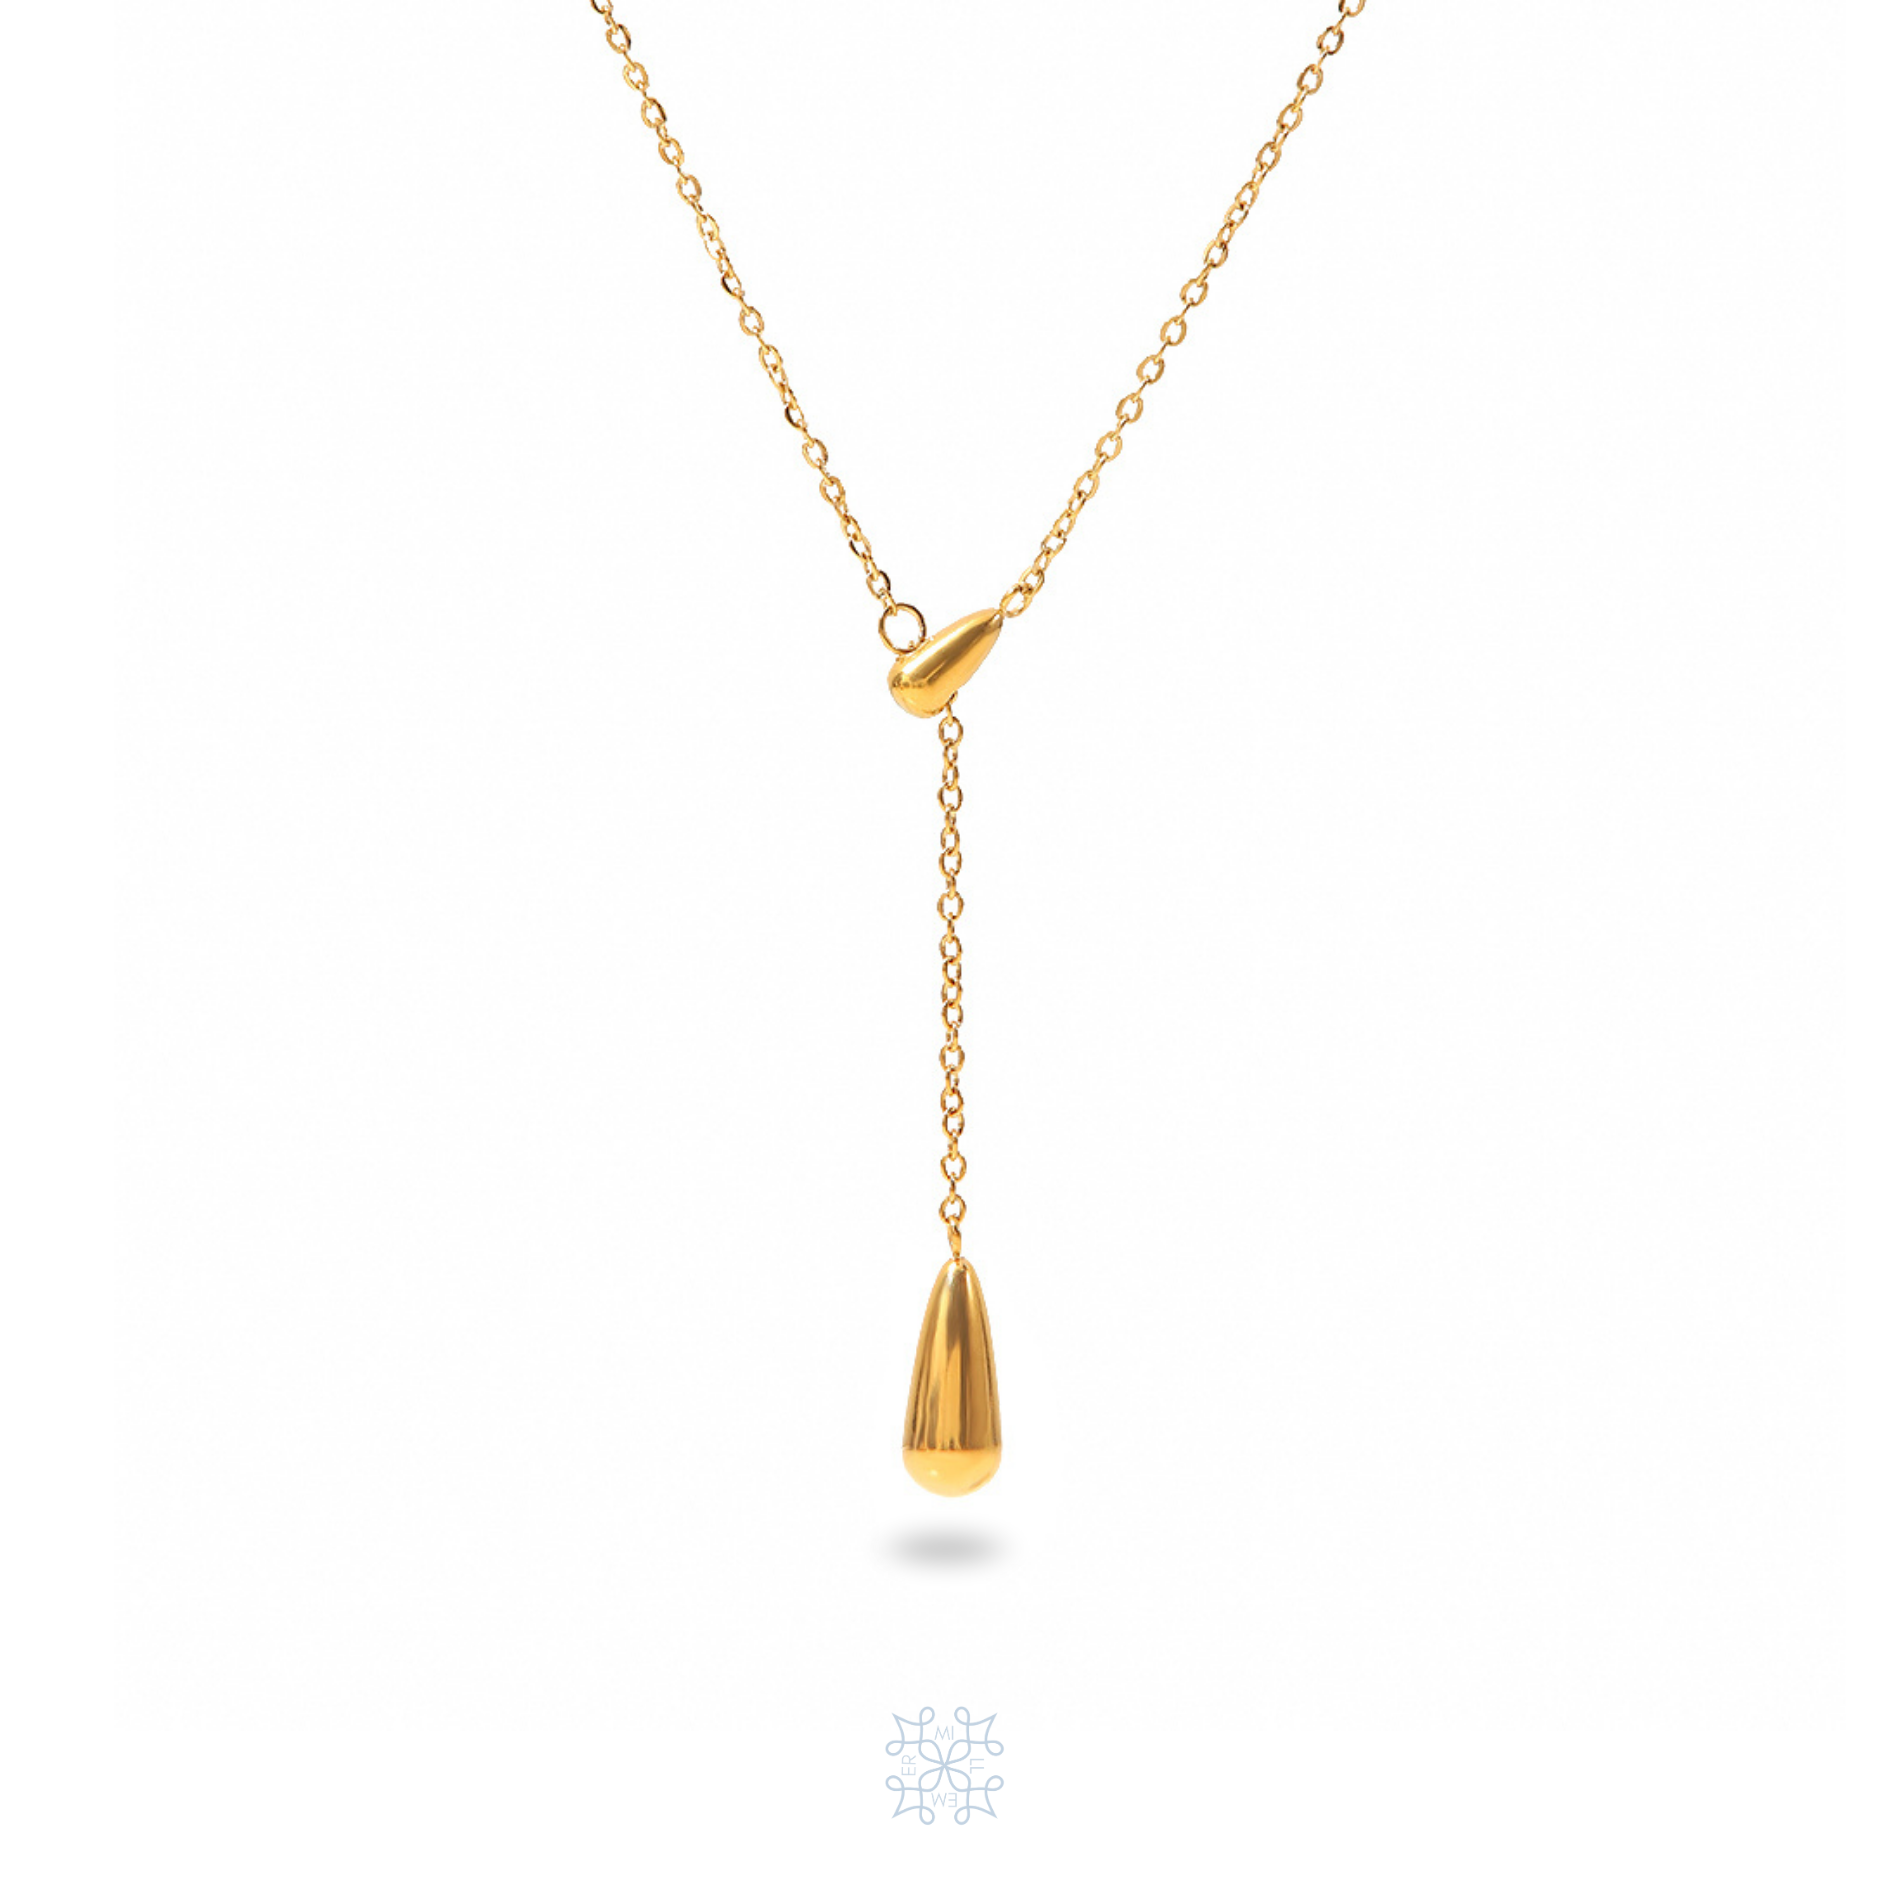 Elegant Slim Gold Chain with a Waterdrop pendant who is movable making the chain like a choker or longer necklace by reducing the drop distance of it. The water drop is attached on a smaller diagonal waterdrop which has a hole in the middle of it where the chain is versatile becoming longer or shorter.